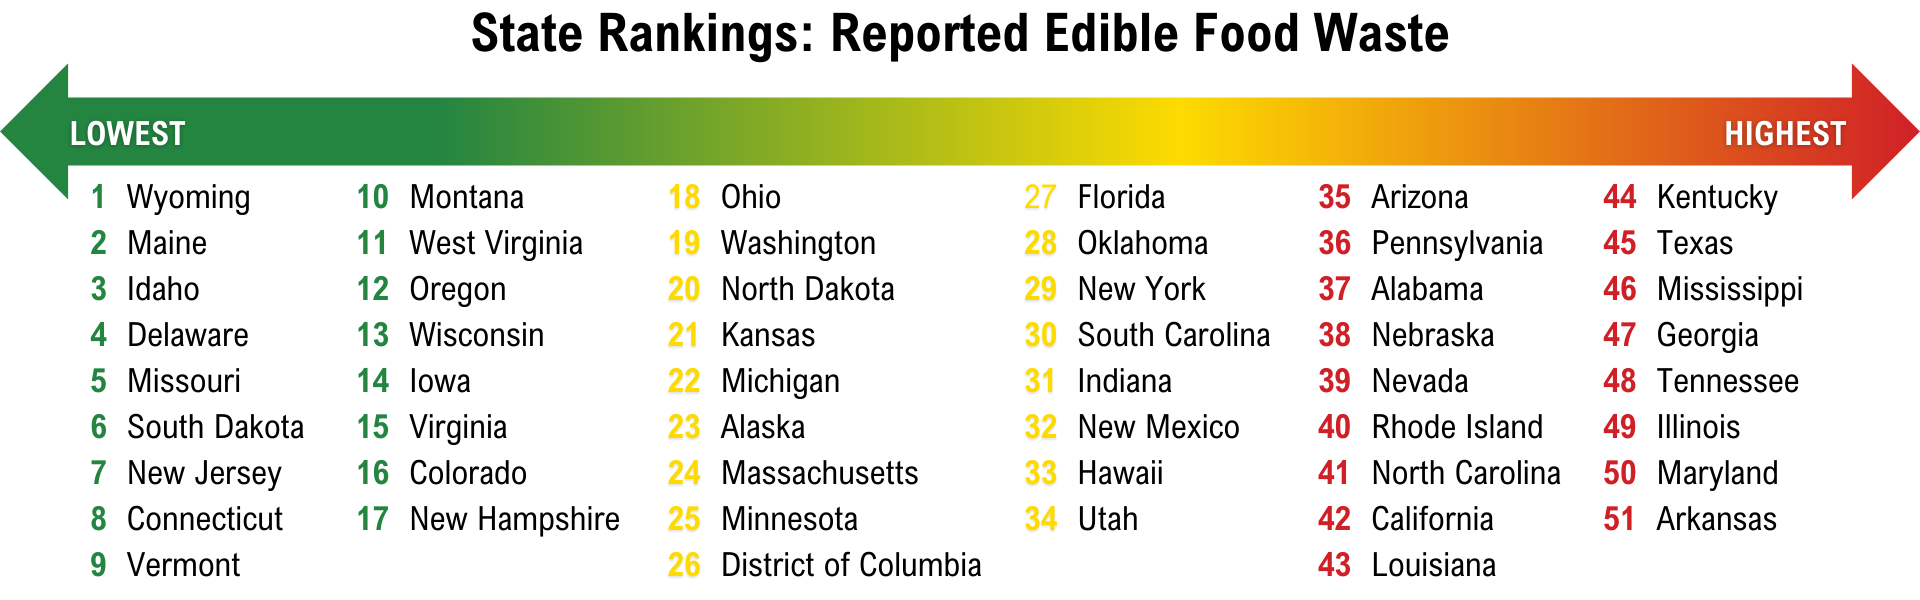 States ranked by reported edible food waste